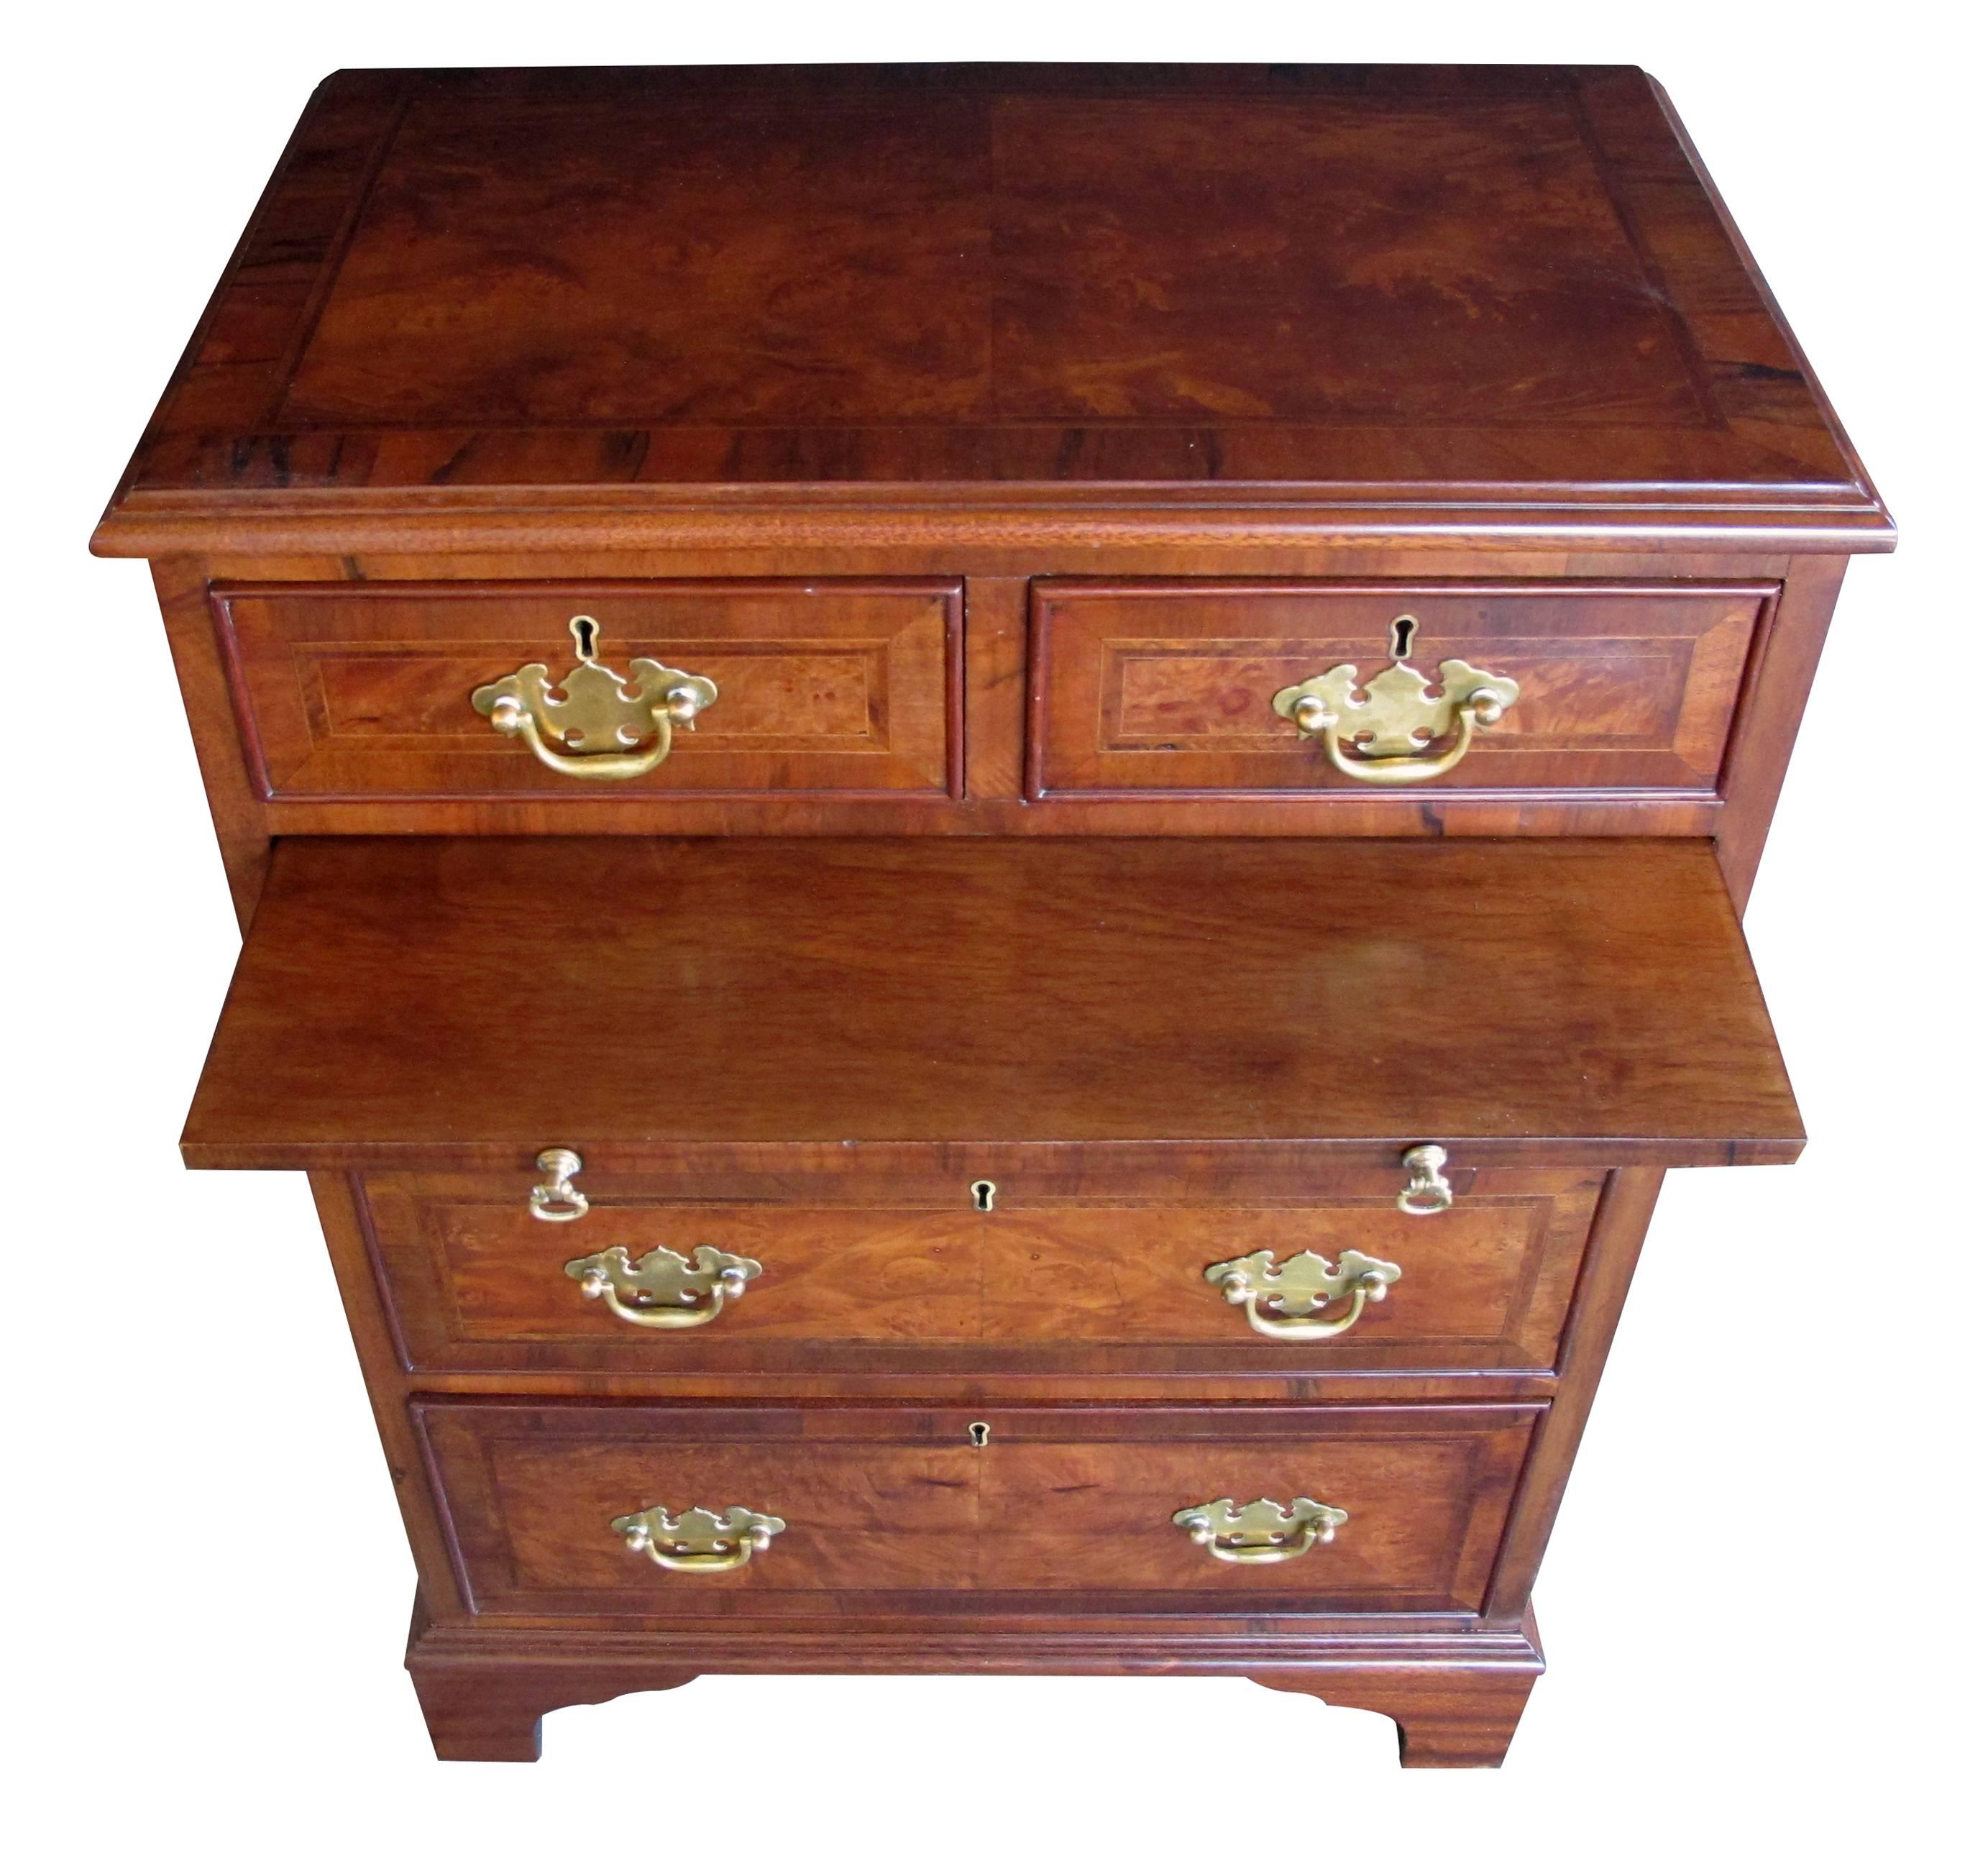 British Good Quality Pair of English George II Style Burl Walnut Bedside Chests